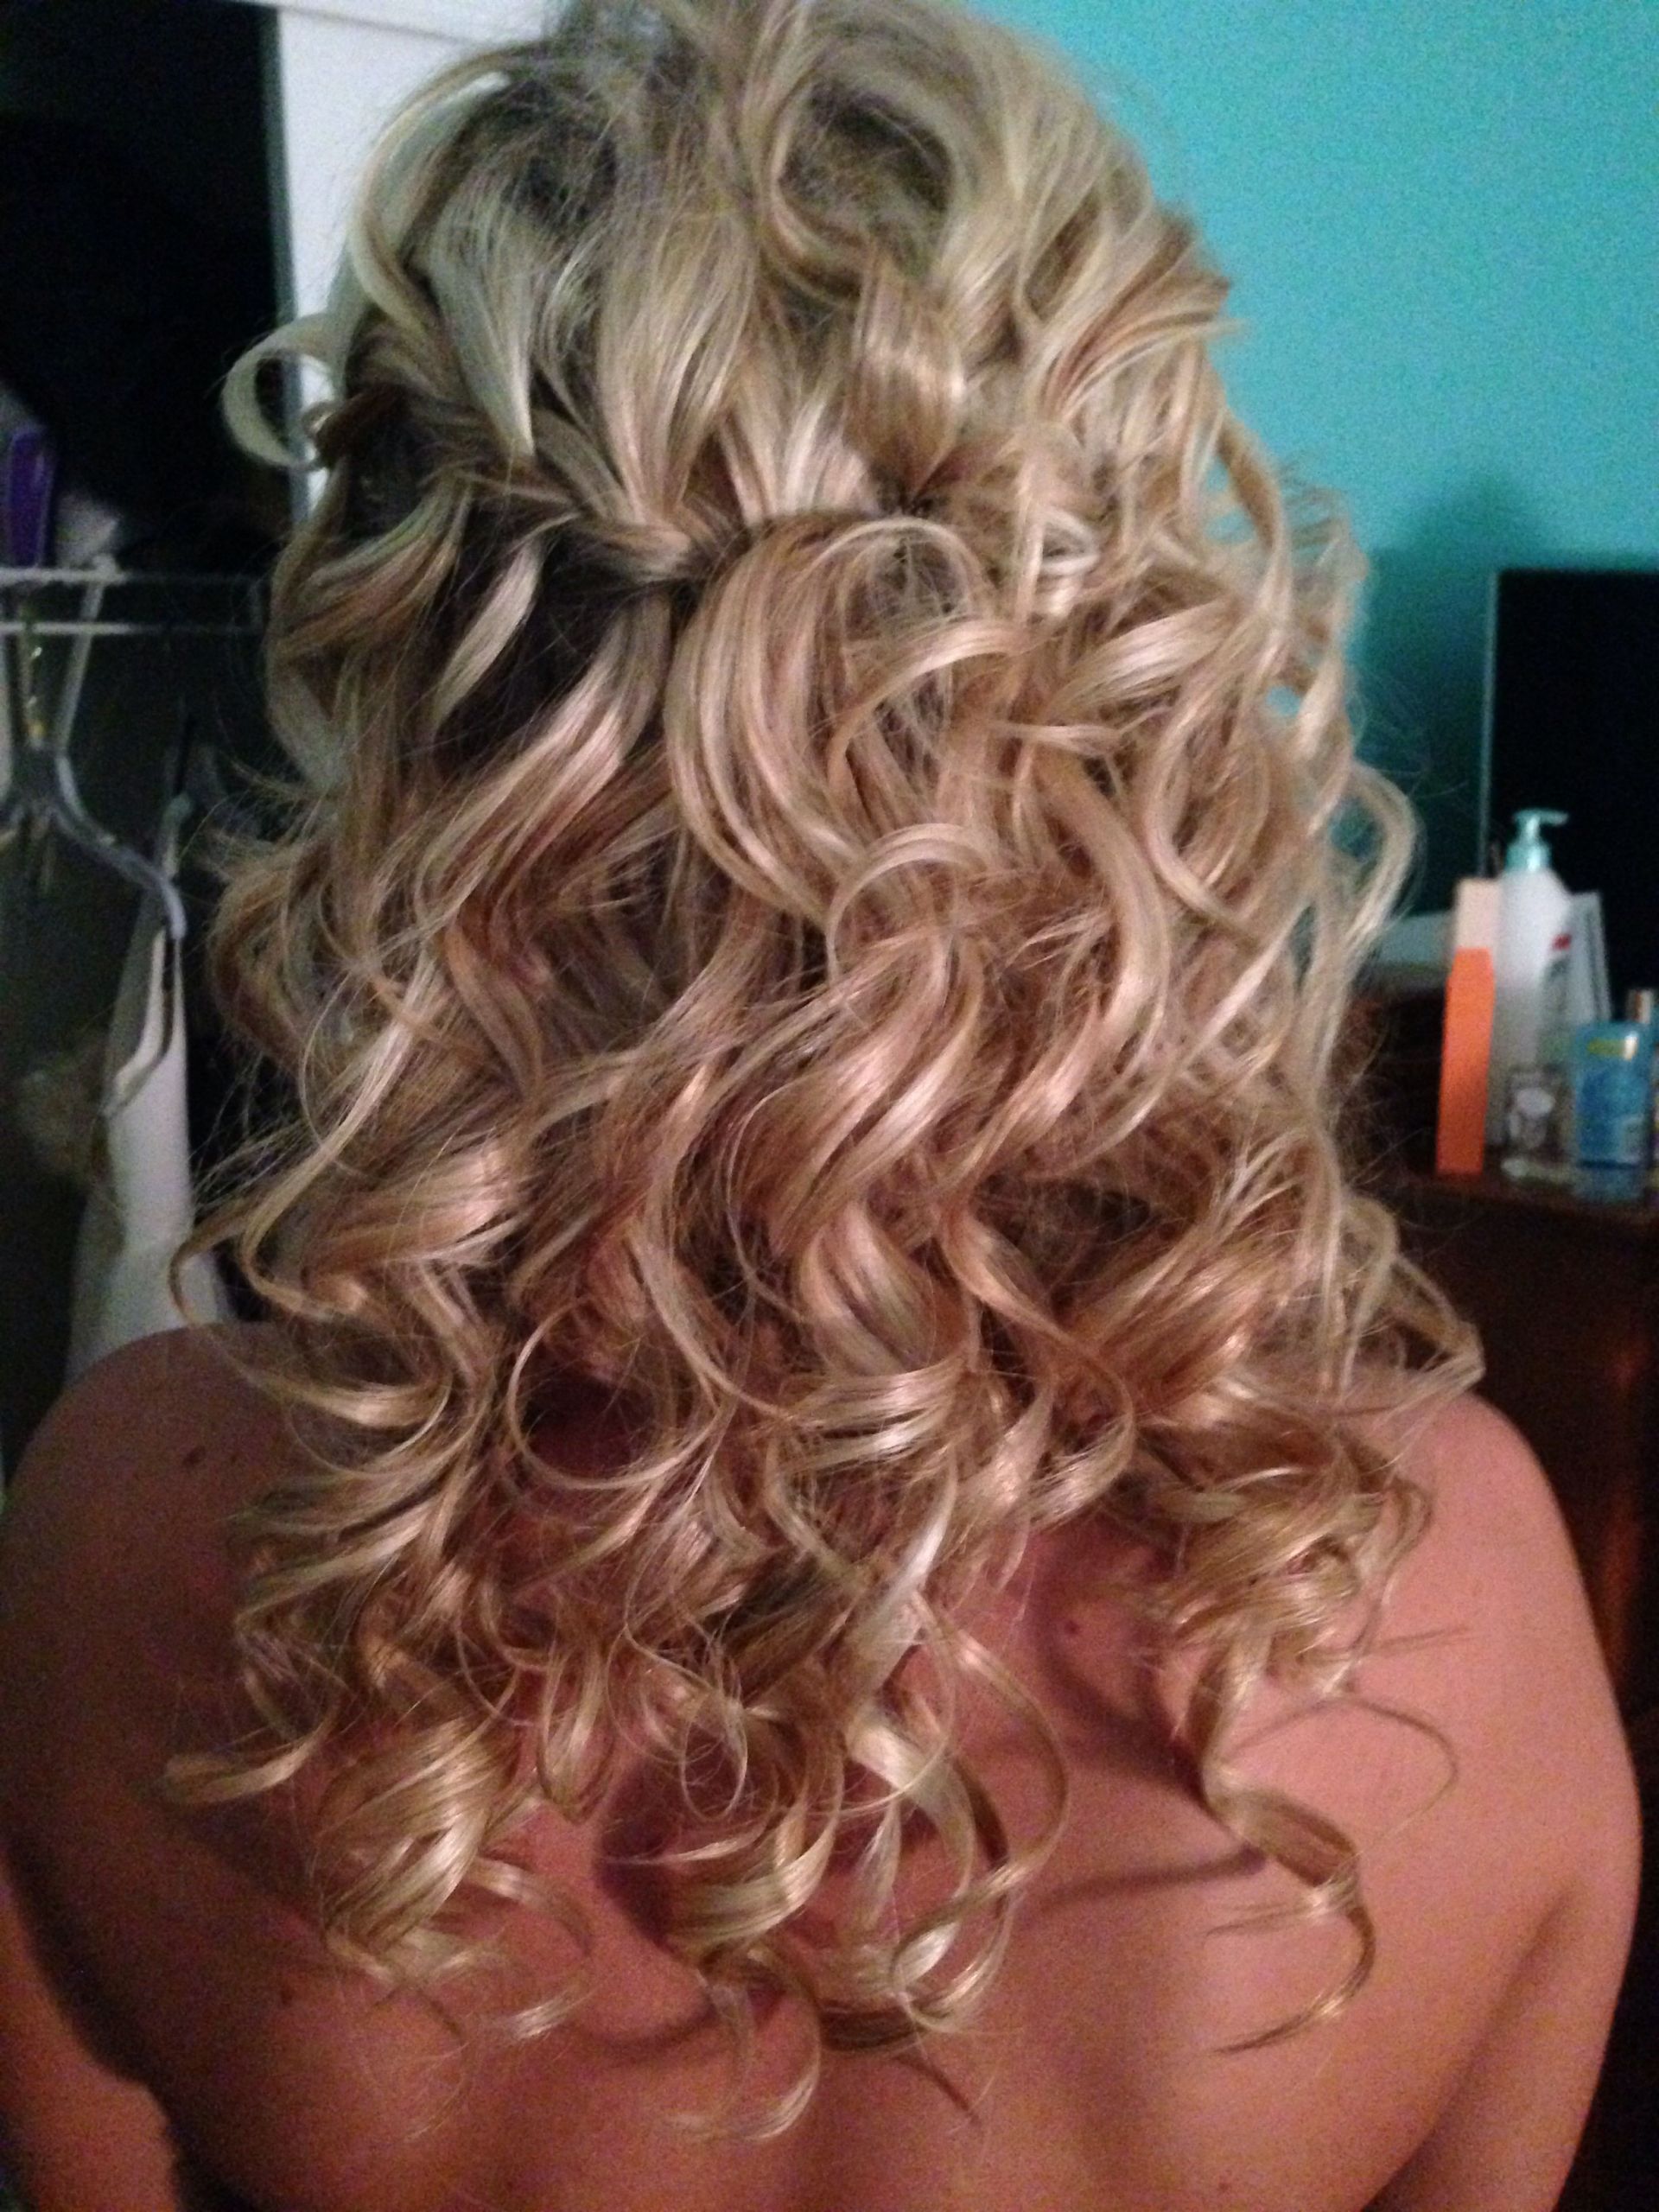 Curled Hairstyles For Bridesmaids
 Bridesmaid hairstyle down and curly